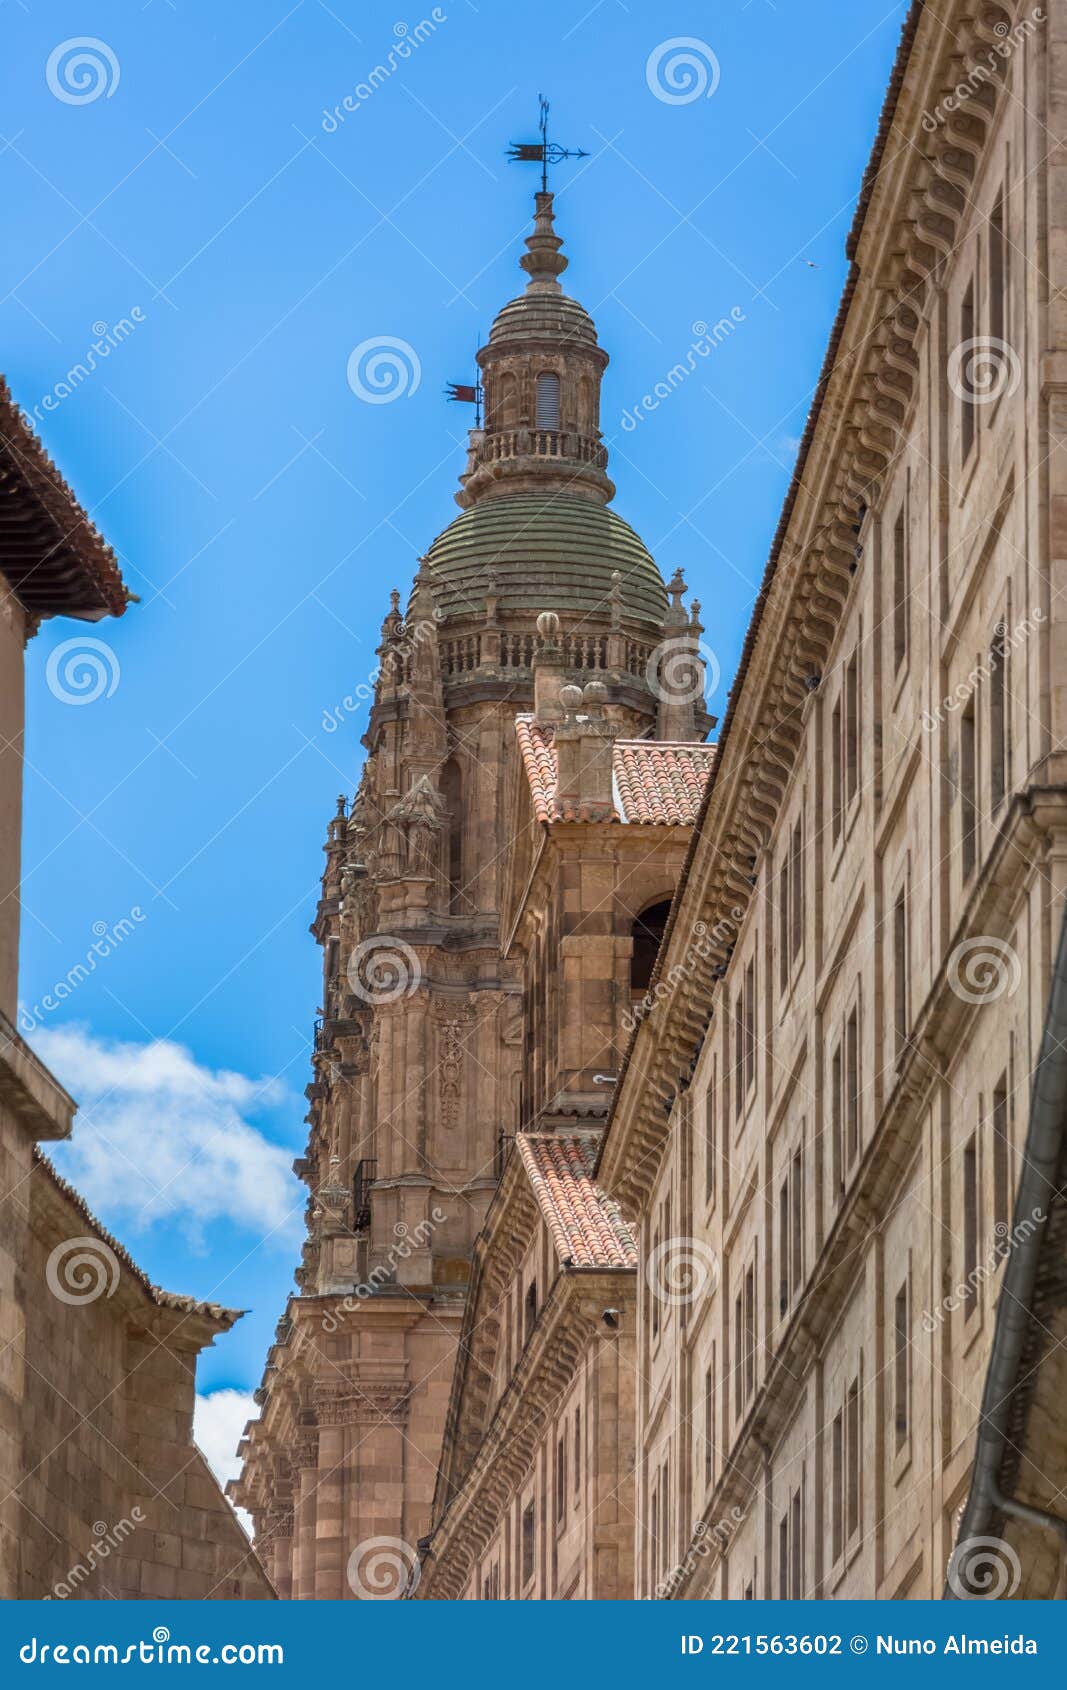 view at the baroque iconic tower at the la clerecÃÂ­a building, pontifical university at salamanca, universidad pontificia de